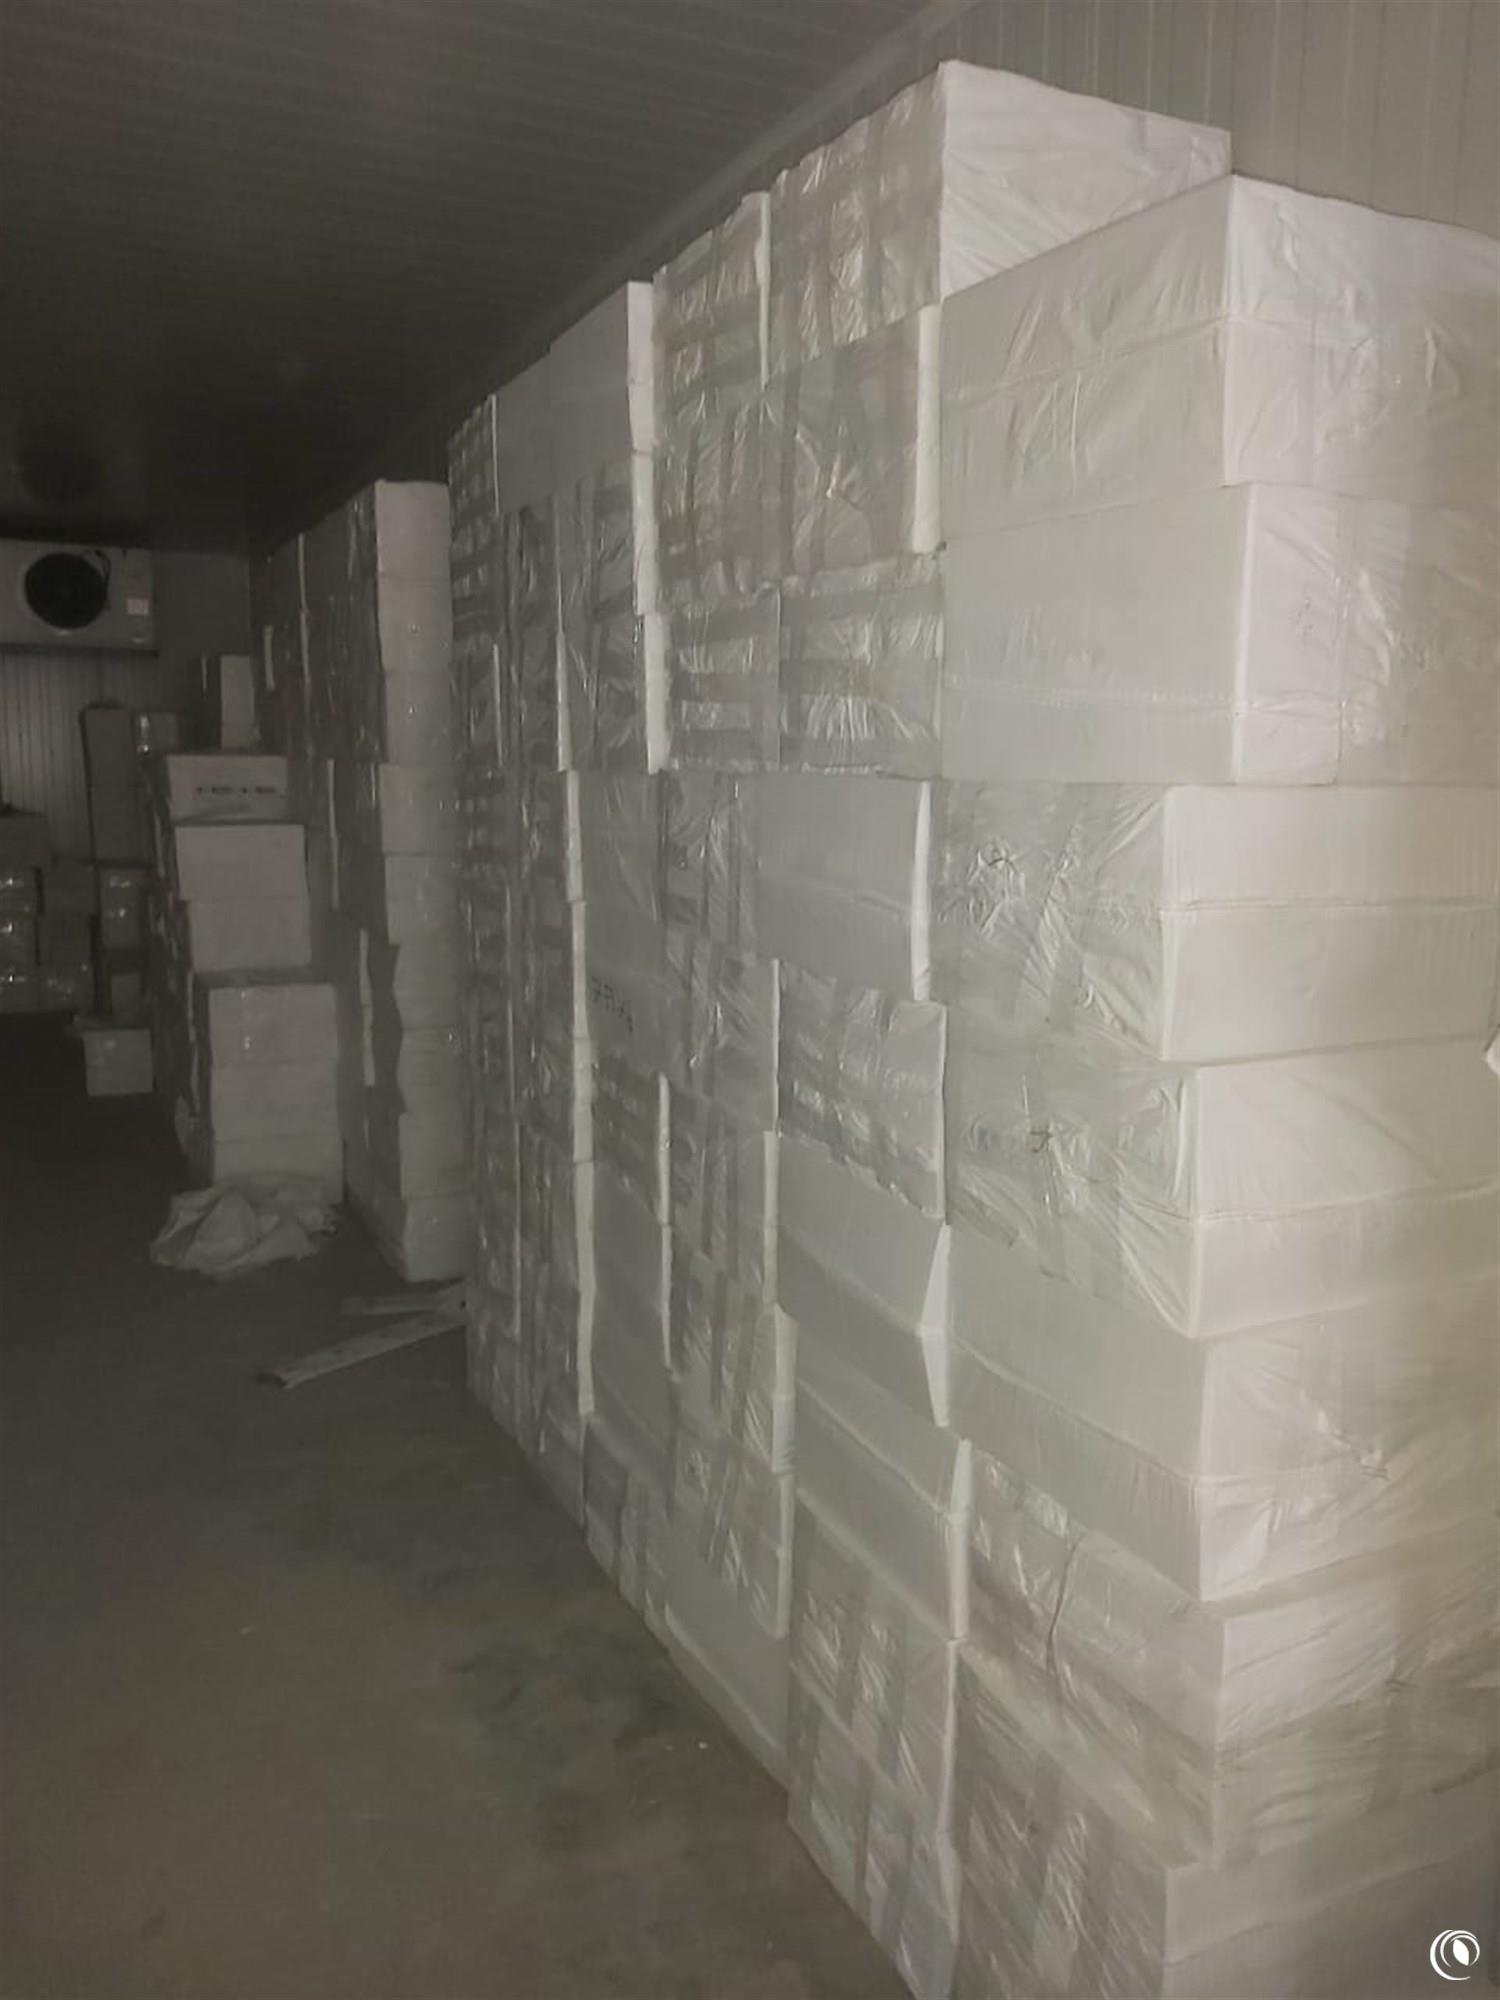 The Regie seized smuggled products in Beirut suburbs